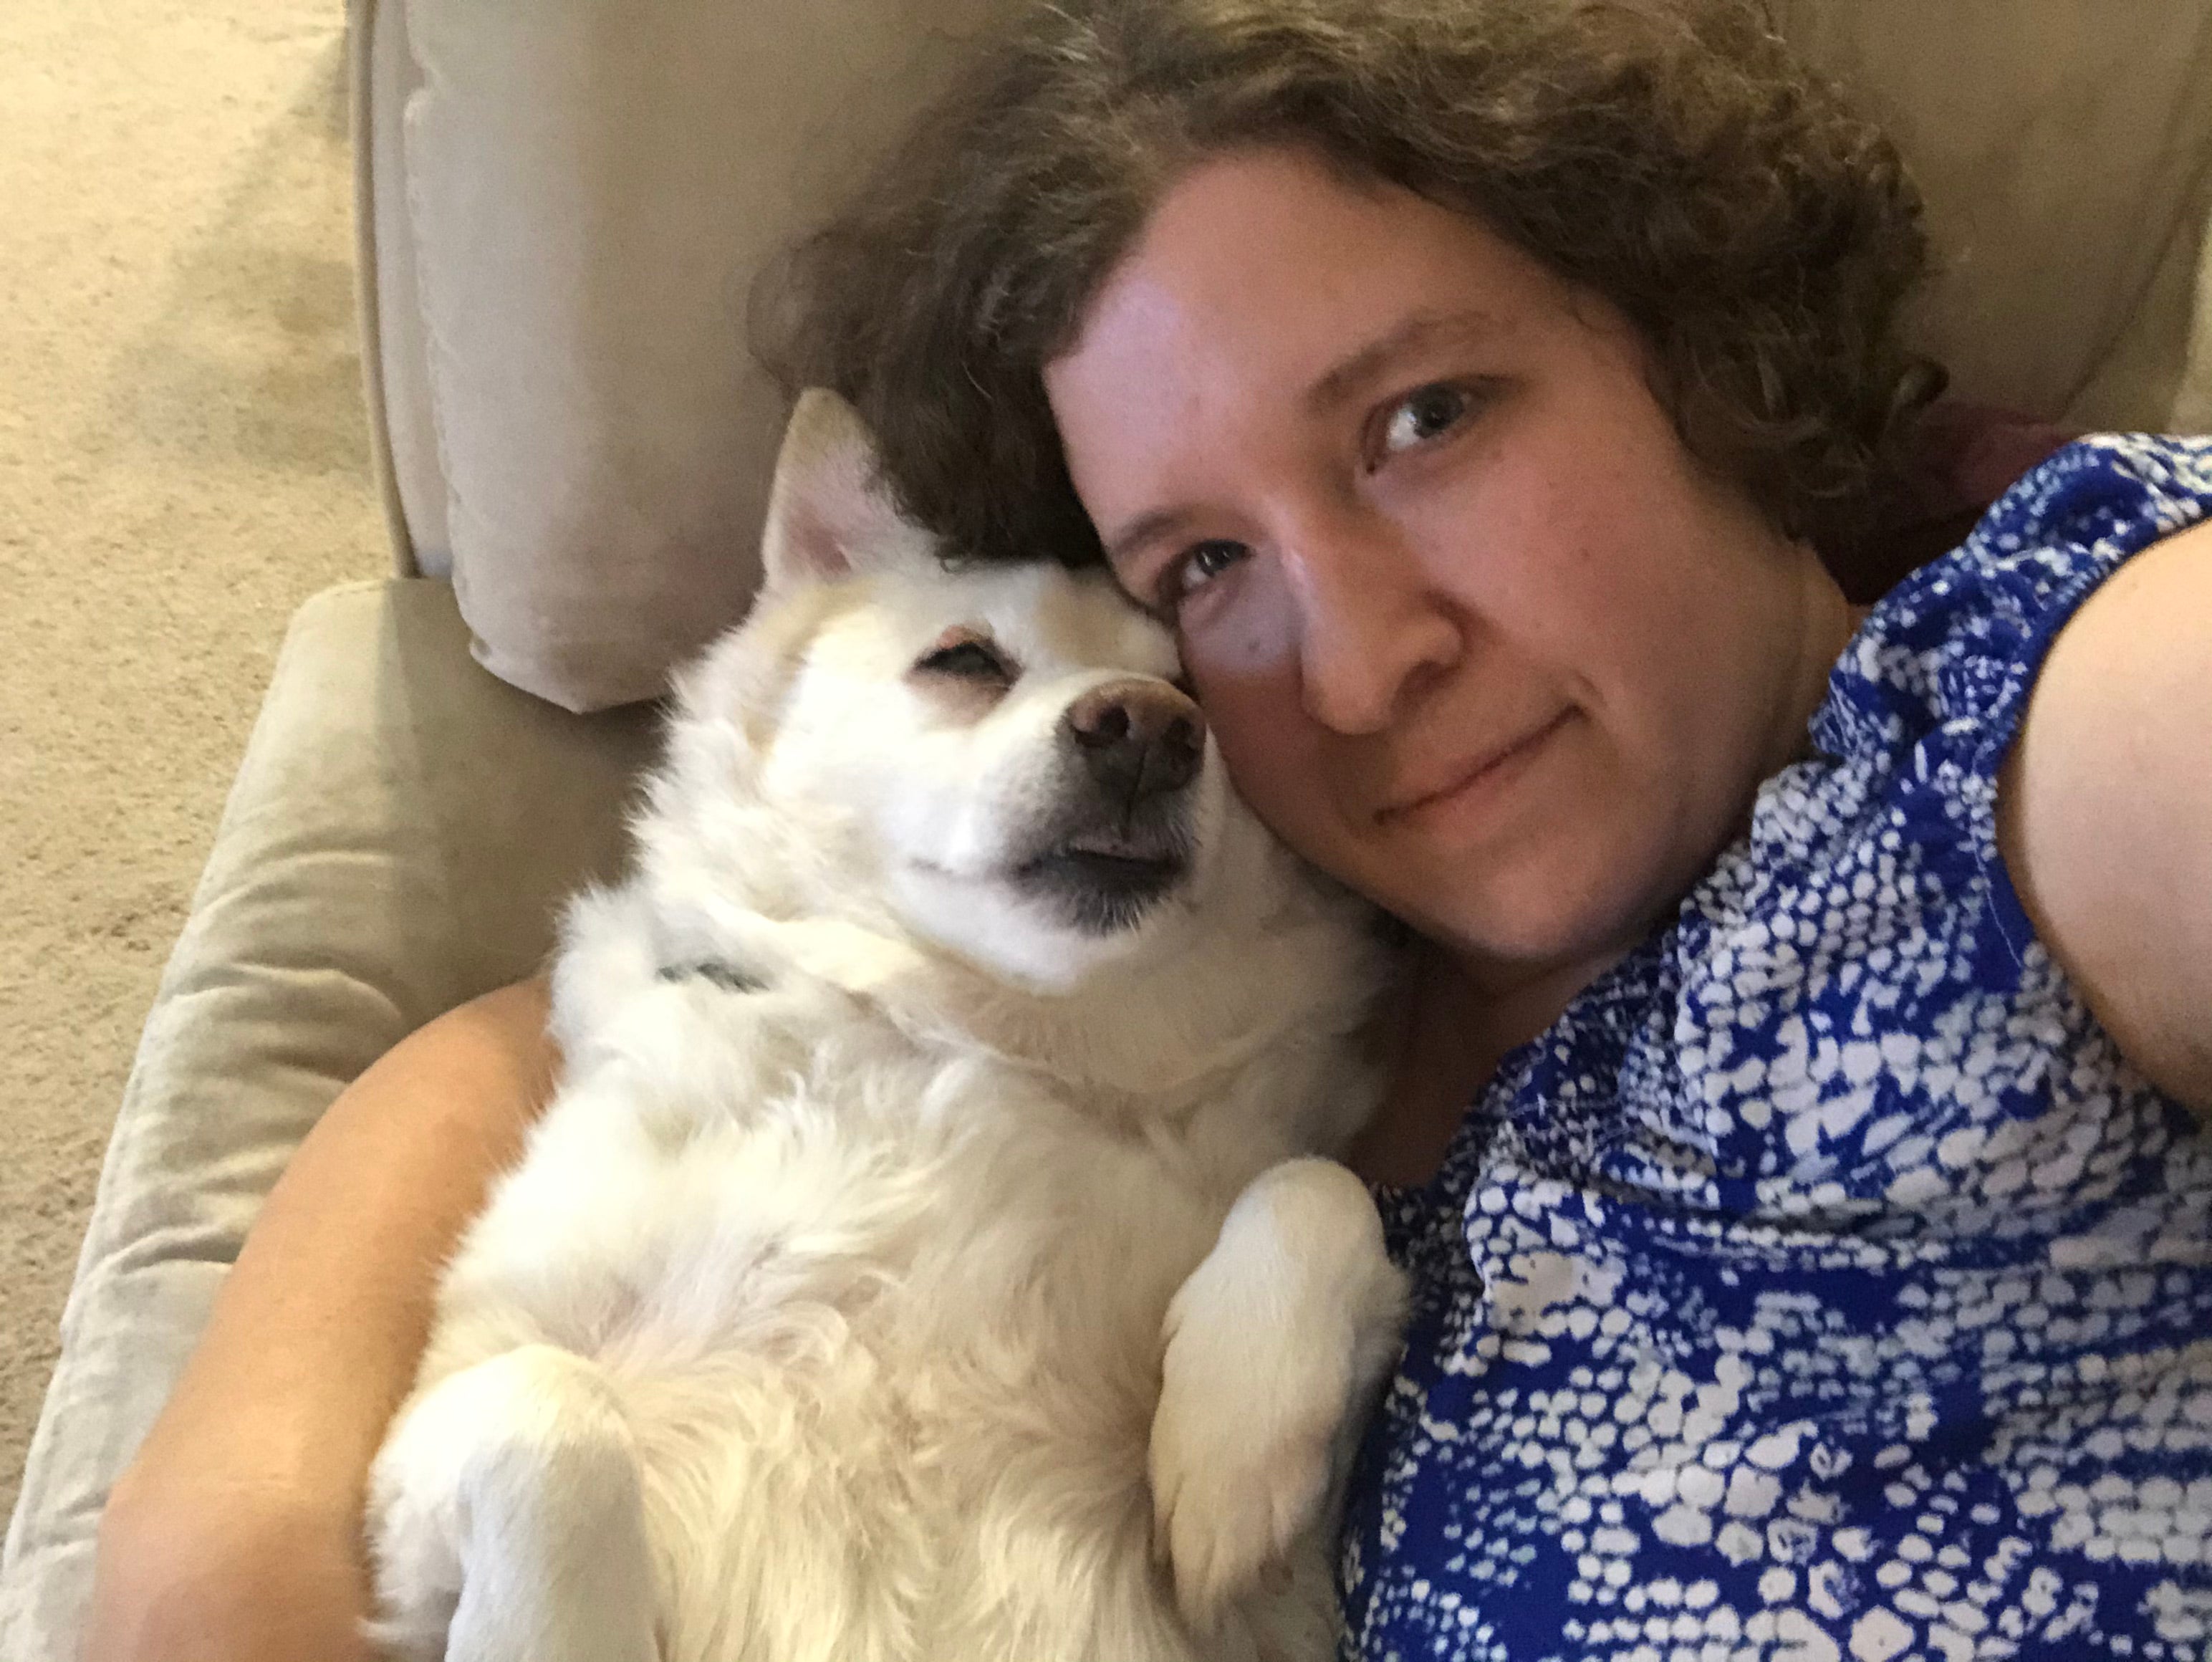 Miriam and her dog, Sasha, lying on the couch together.